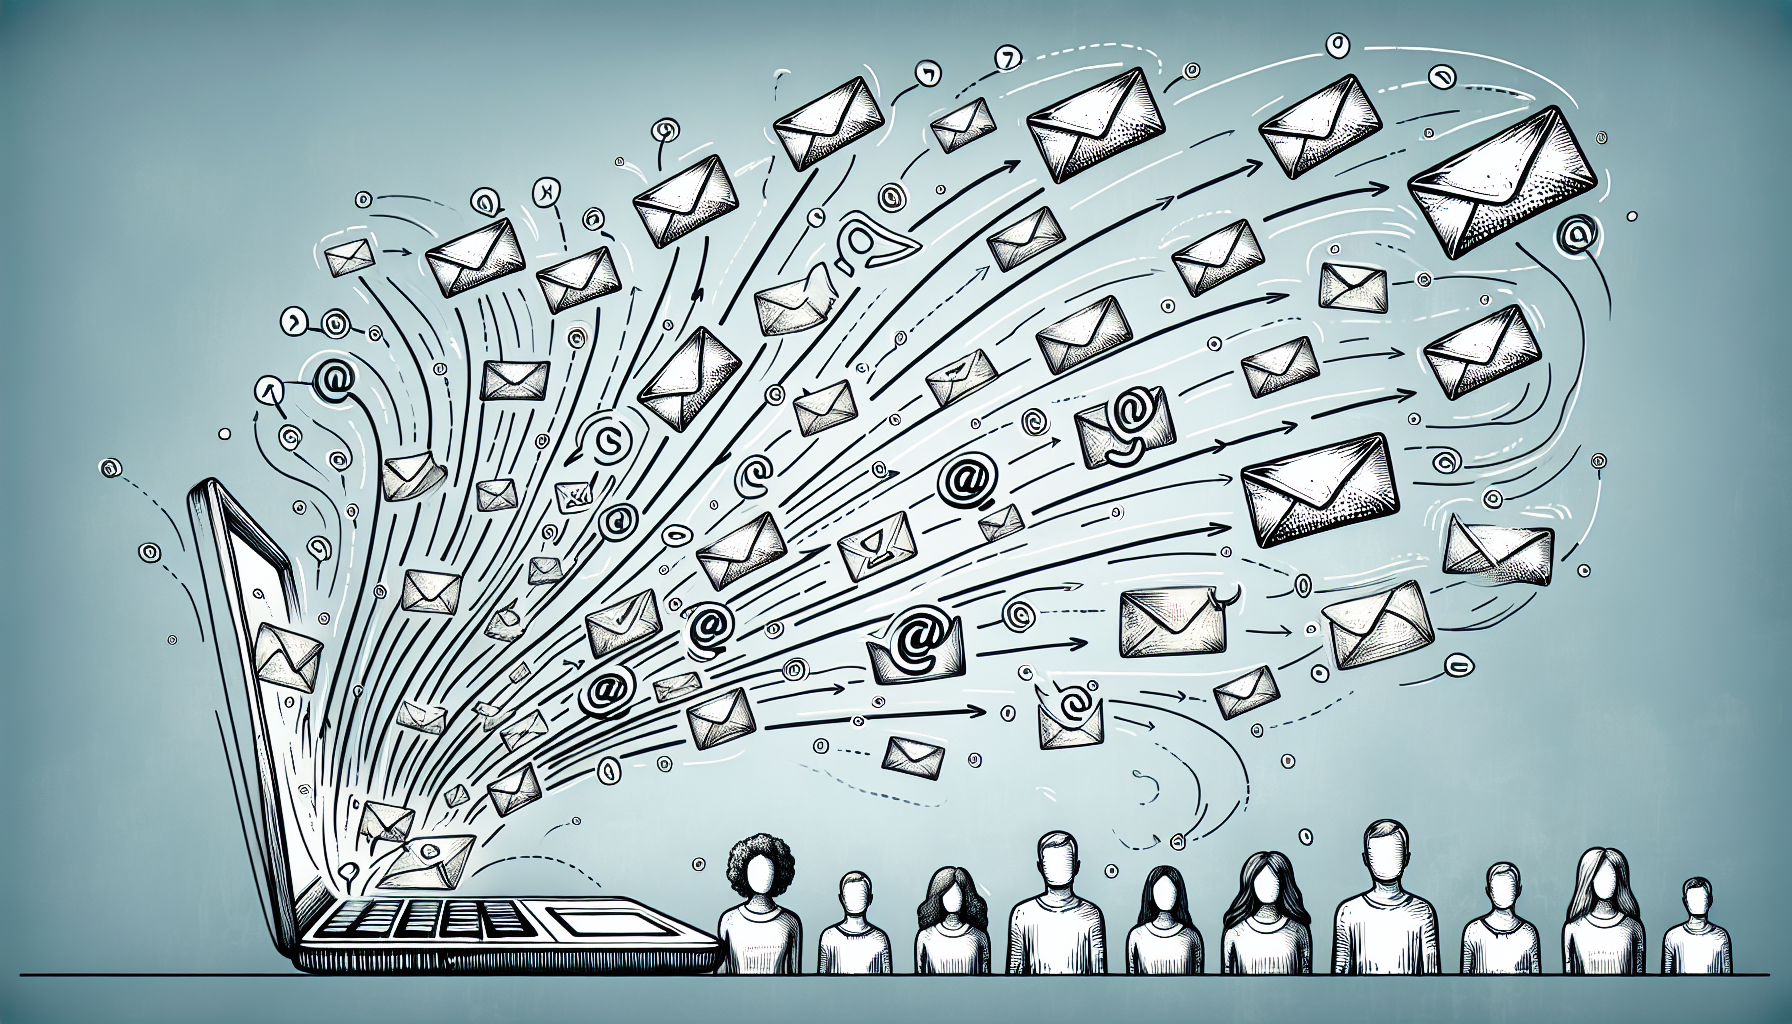 Illustration of connecting with email subscribers